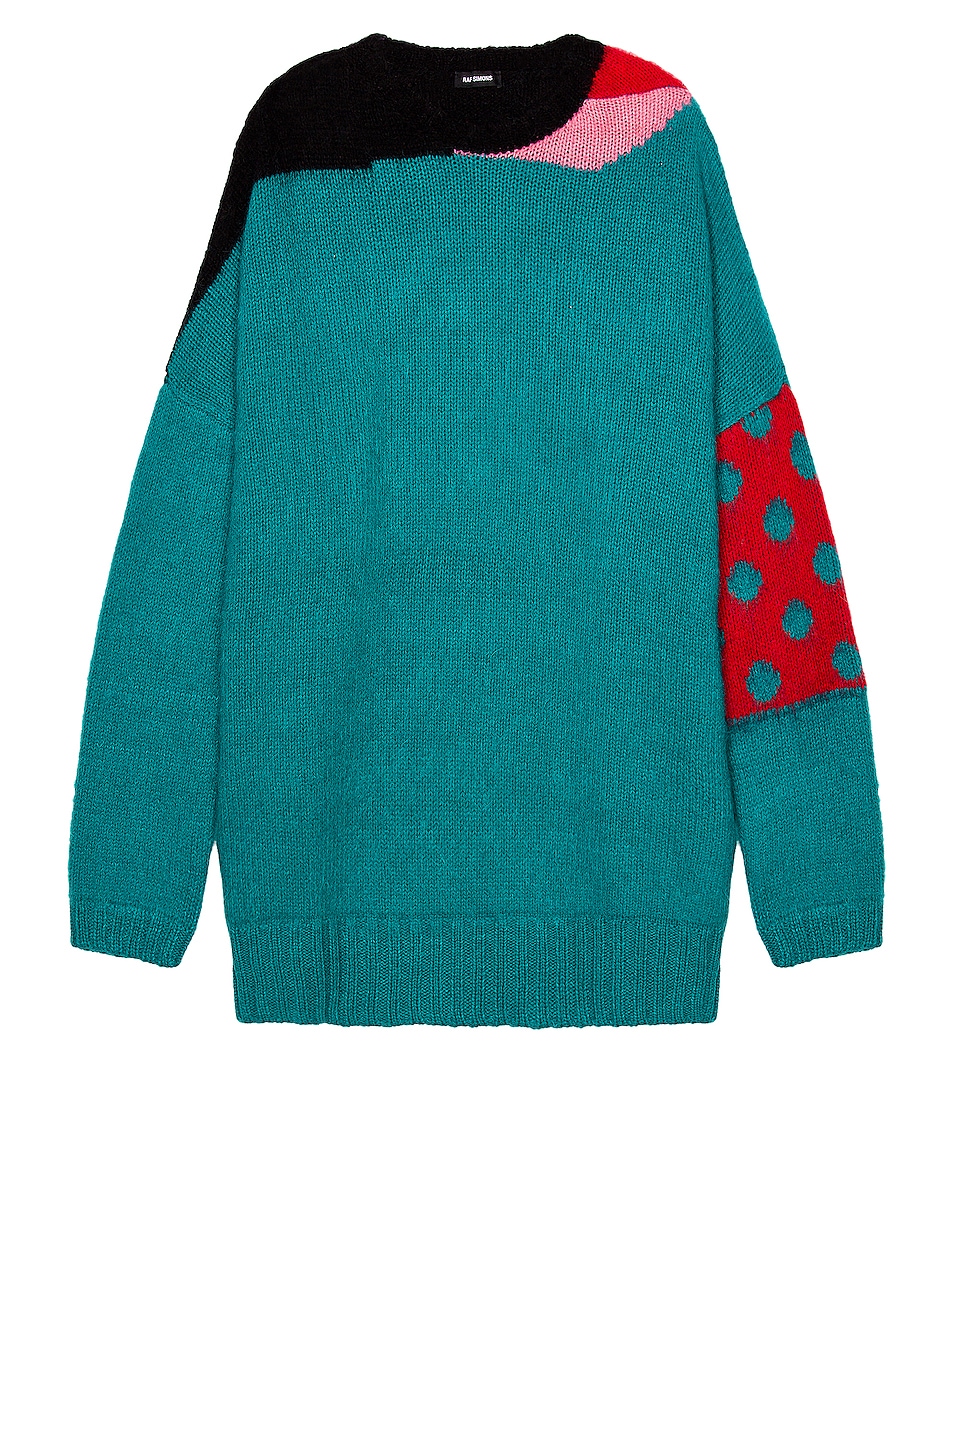 Image 1 of Raf Simons Oversized Knit Sweater in Petrol